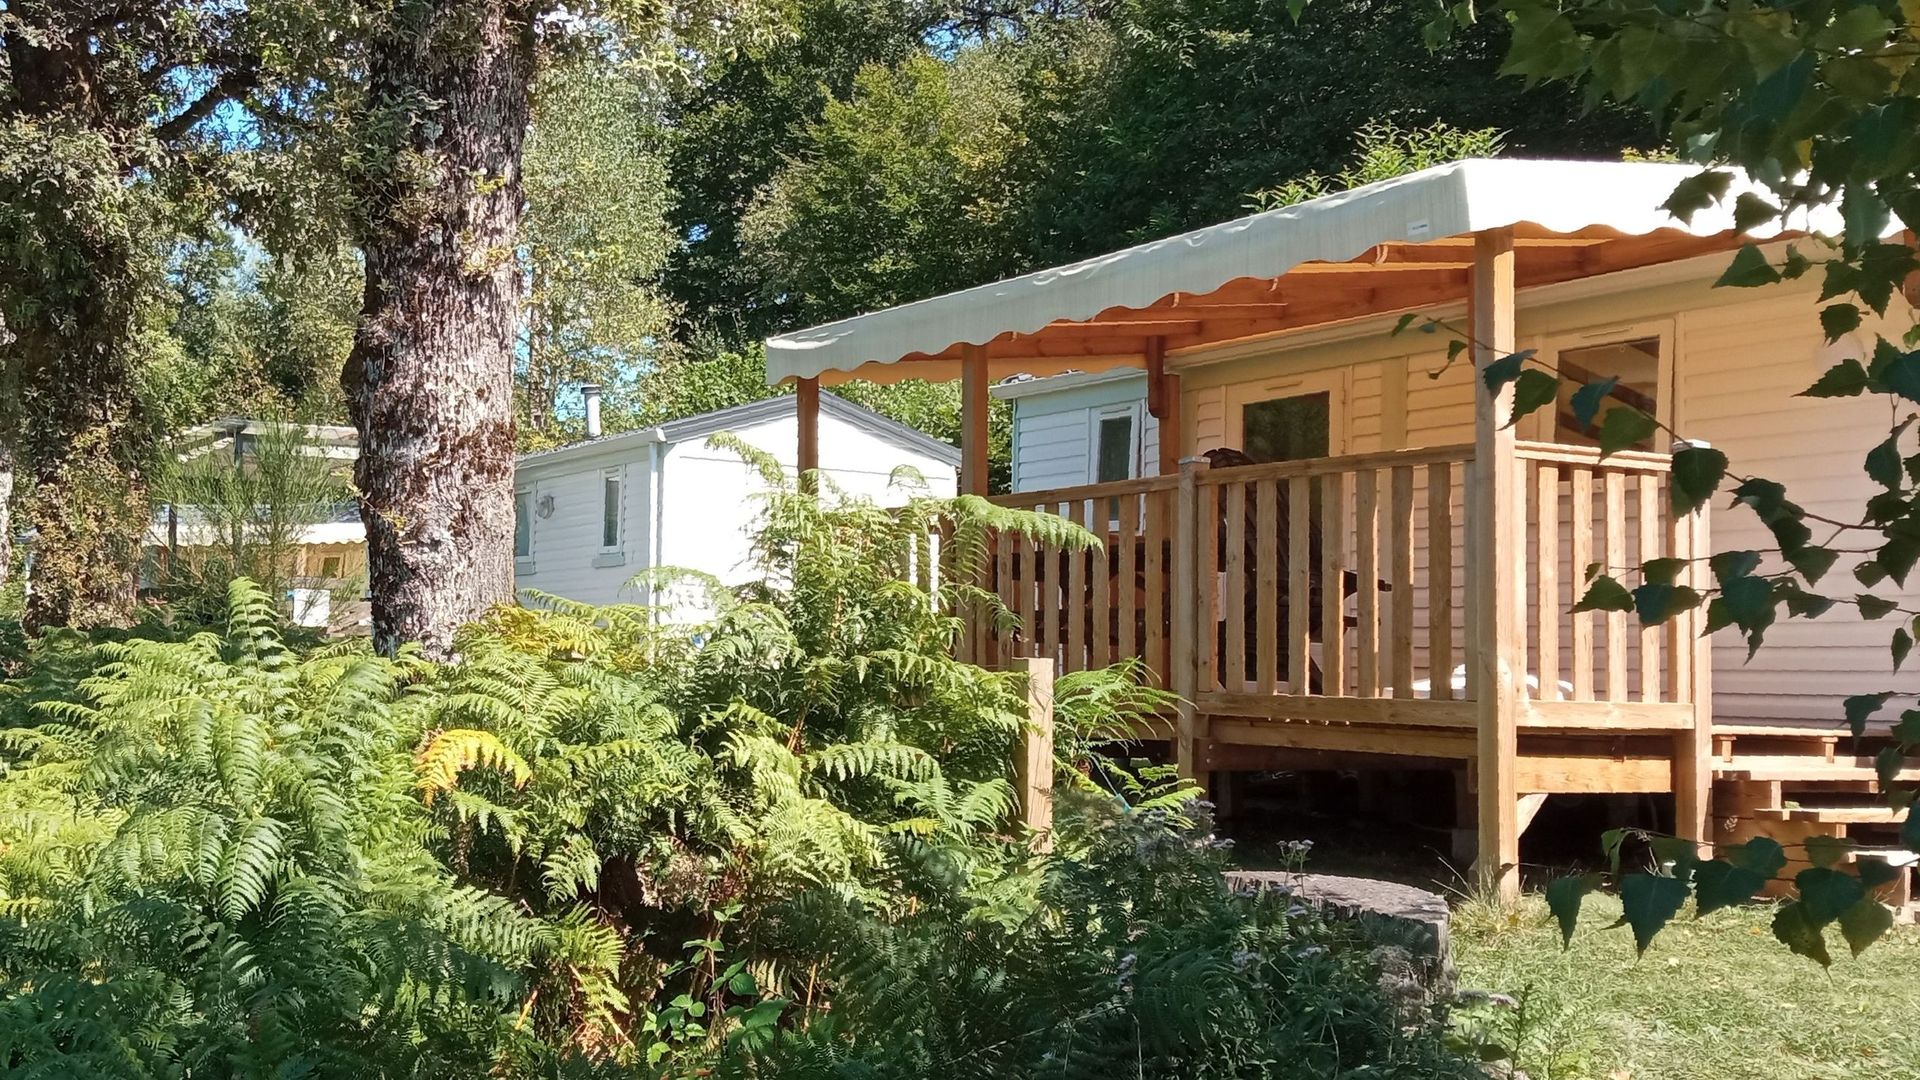 Mobilhome in Aveyron by the lake